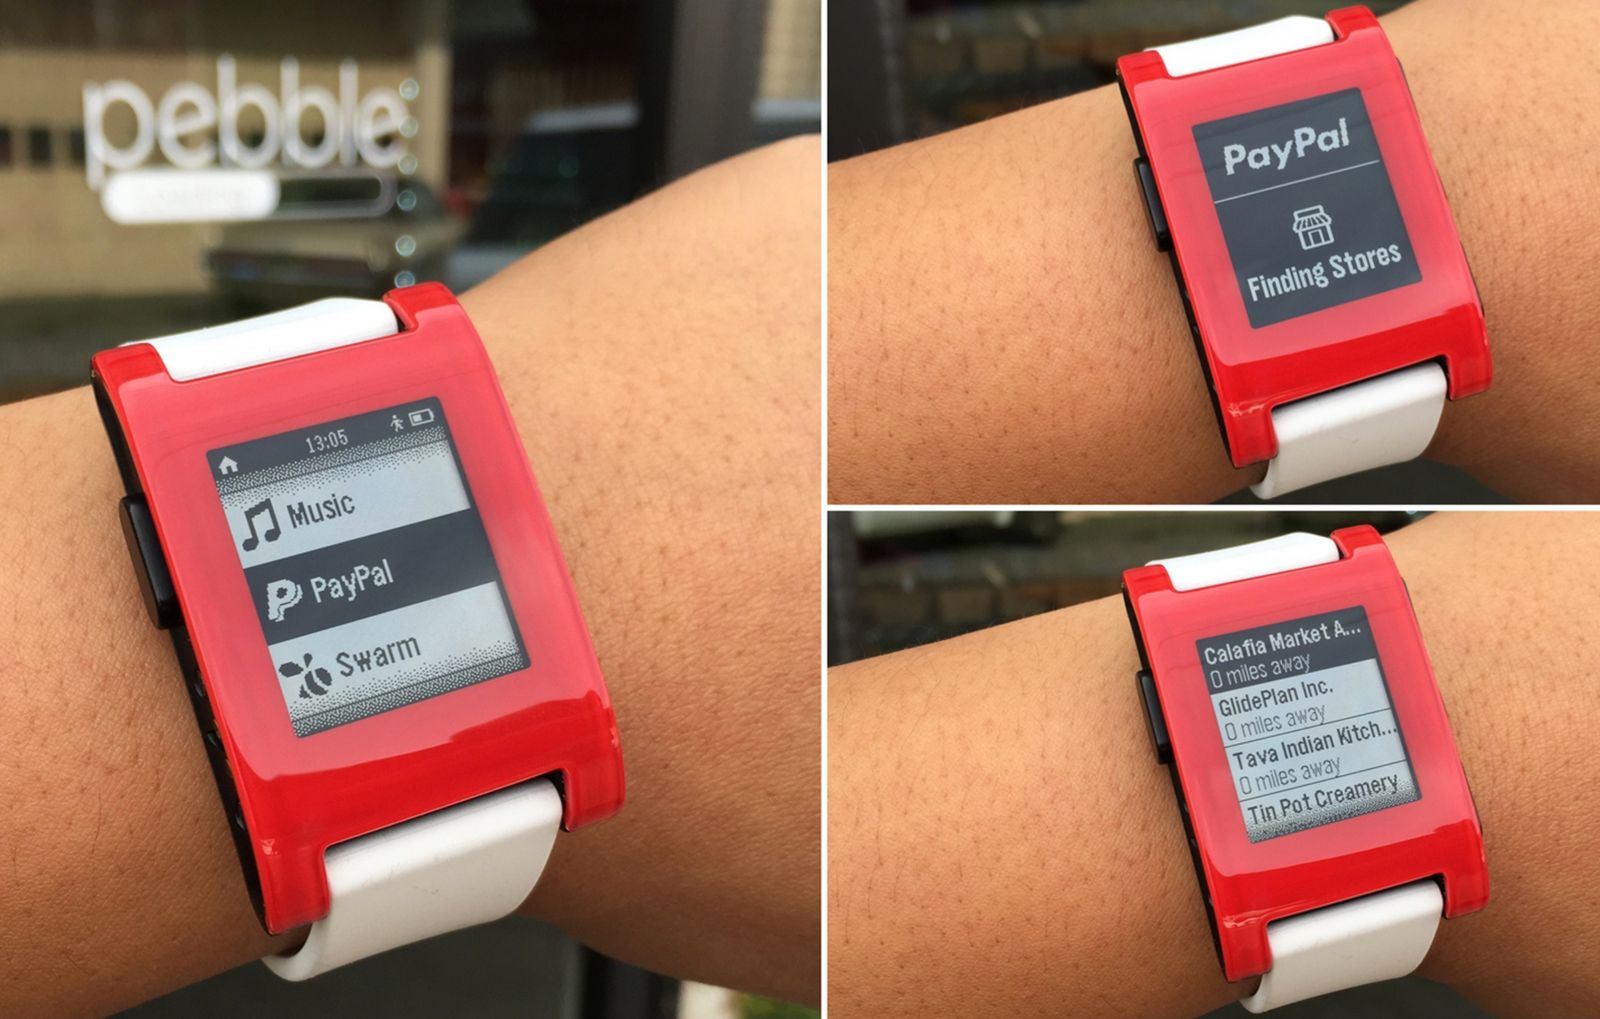 you can now use paypal on pebble to pay for things while out and about image 1